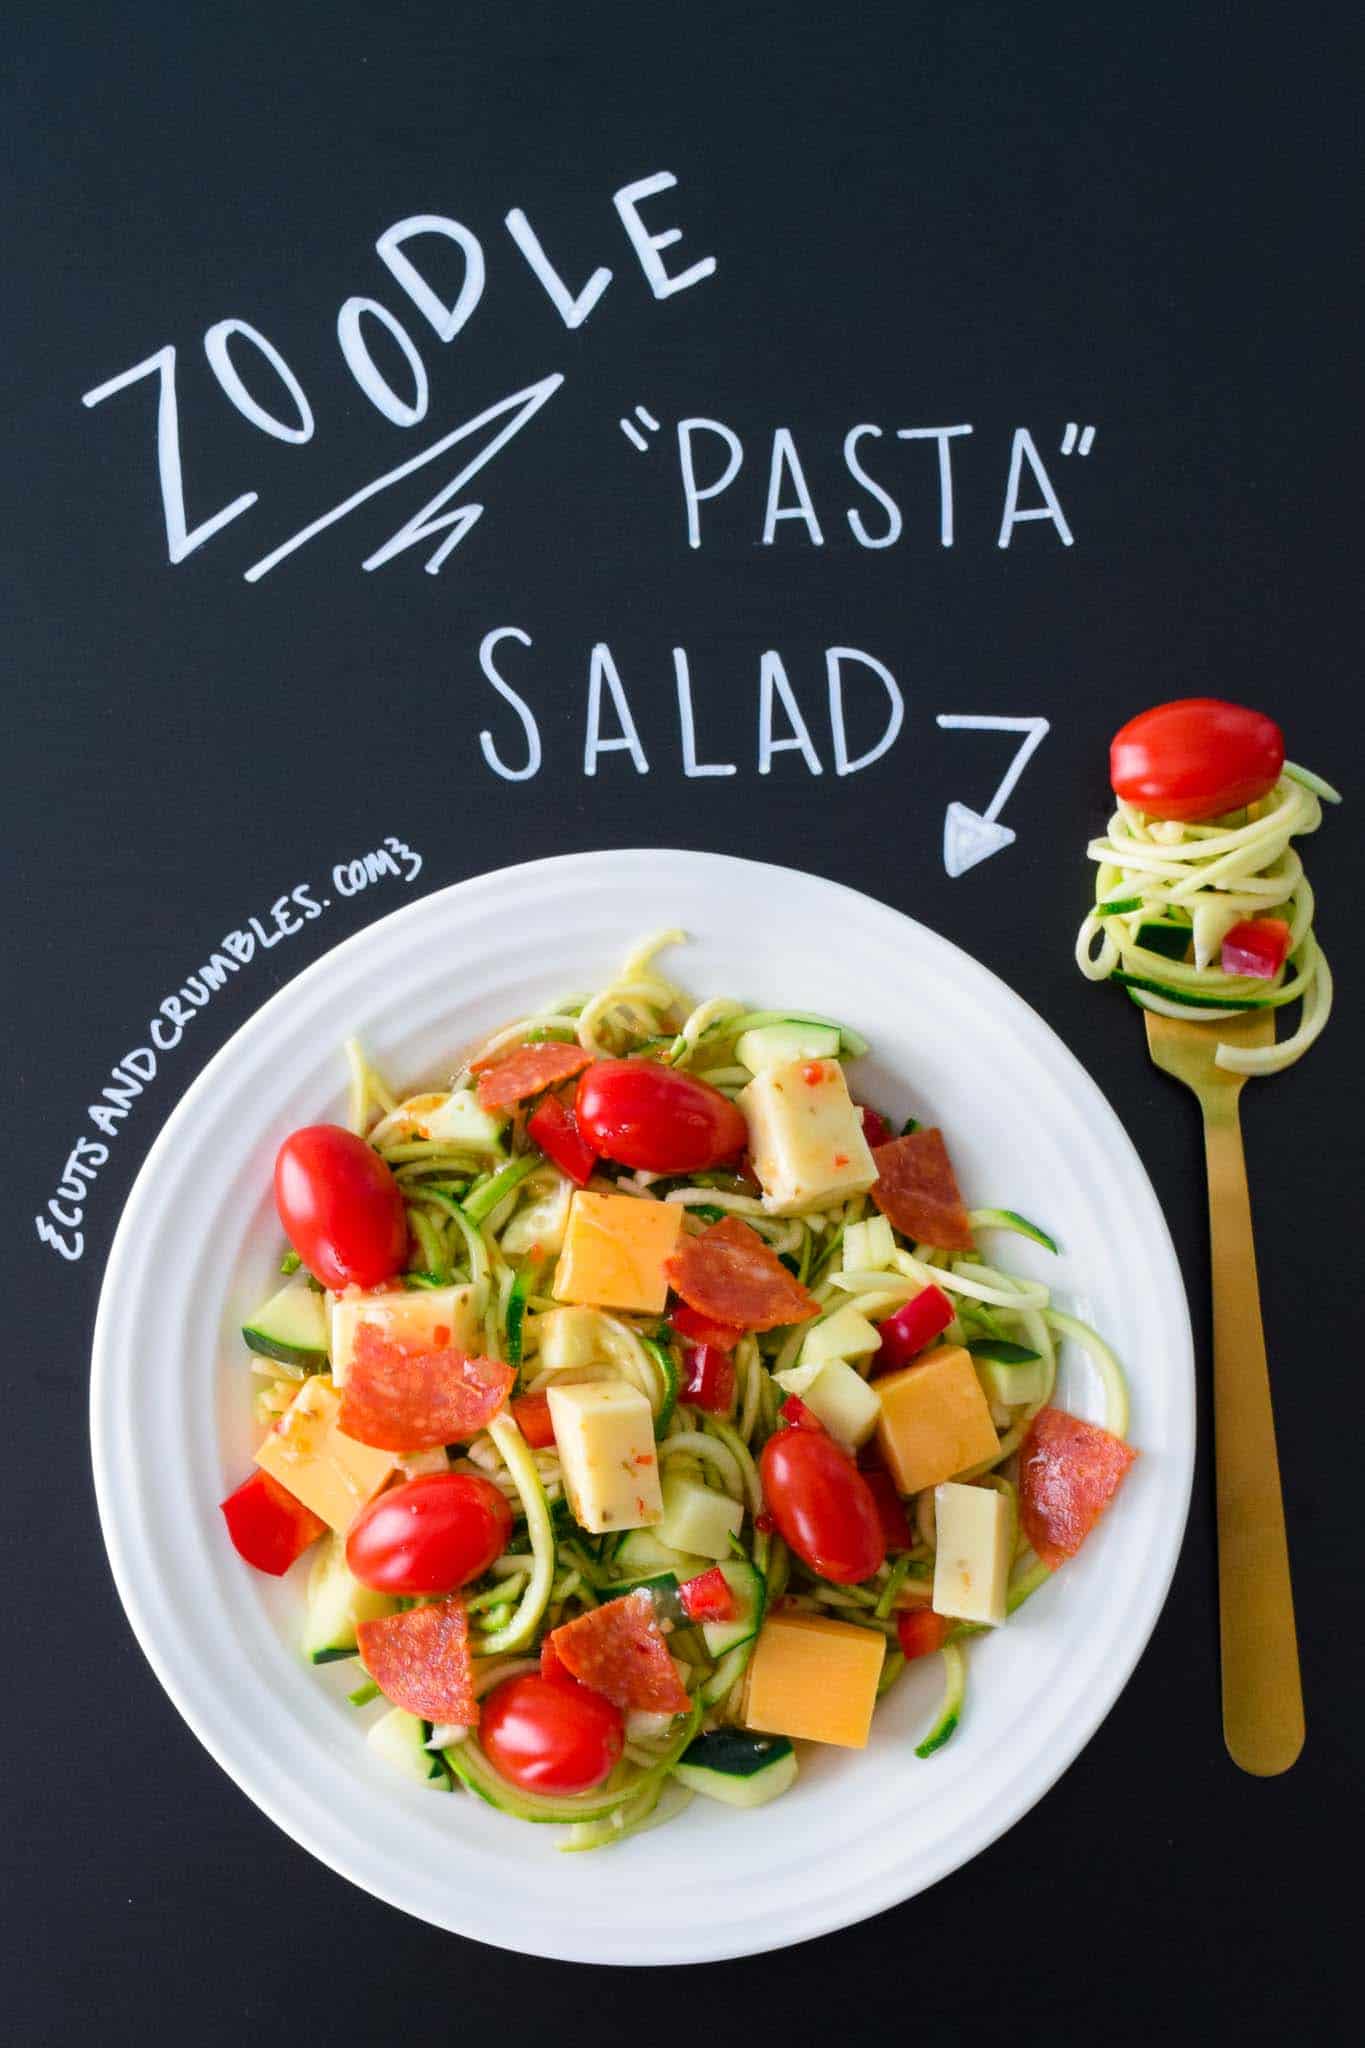 Zoodle Pasta Salad in white bowl with title written on chalkboard